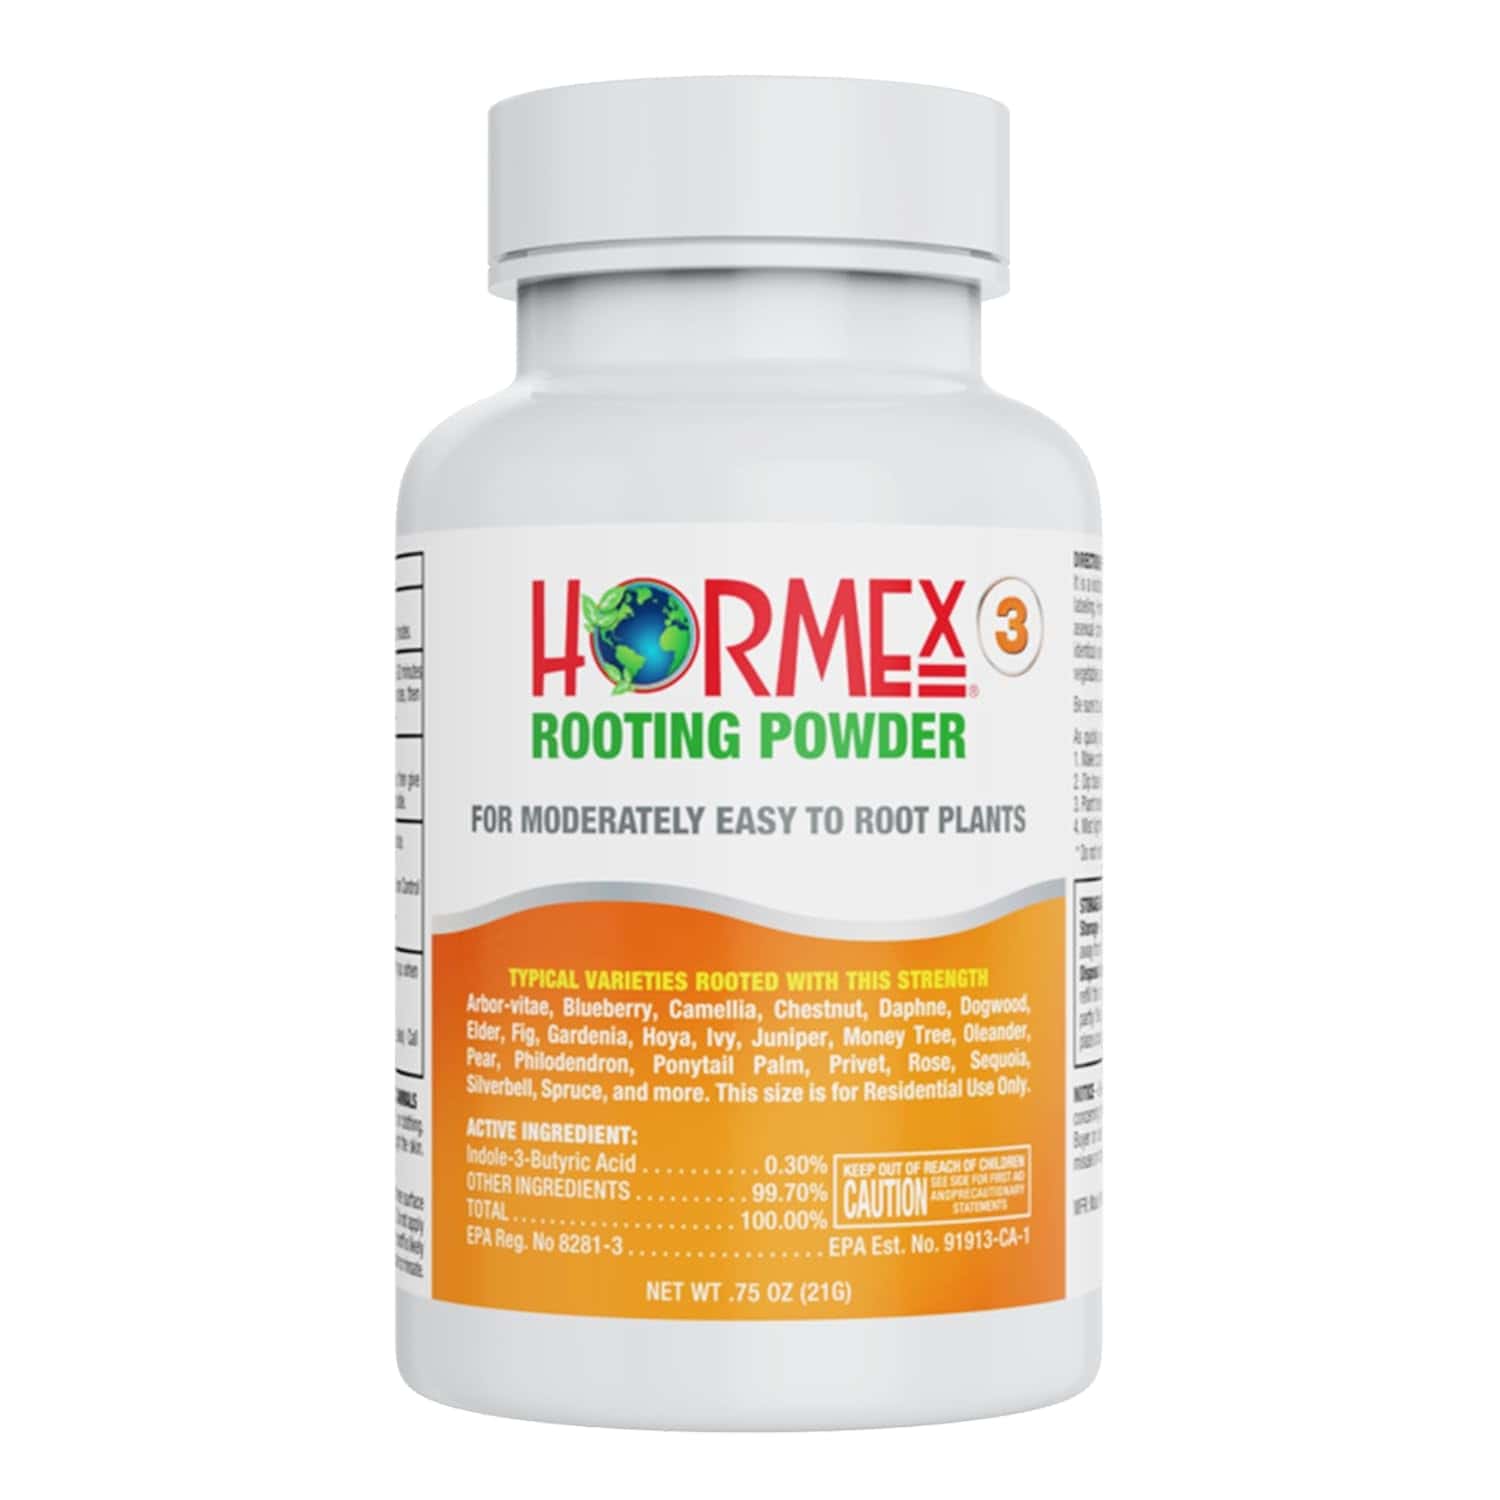 Hormex Rooting Powder #3 - for Moderately Easy to Root Plants - 0.3 IBA Rooting Hormone for Plant Cuttings - Fast & Effective - Free of Alcohol, Dye, Gel & Preservatives for Healthier Roots, 21g